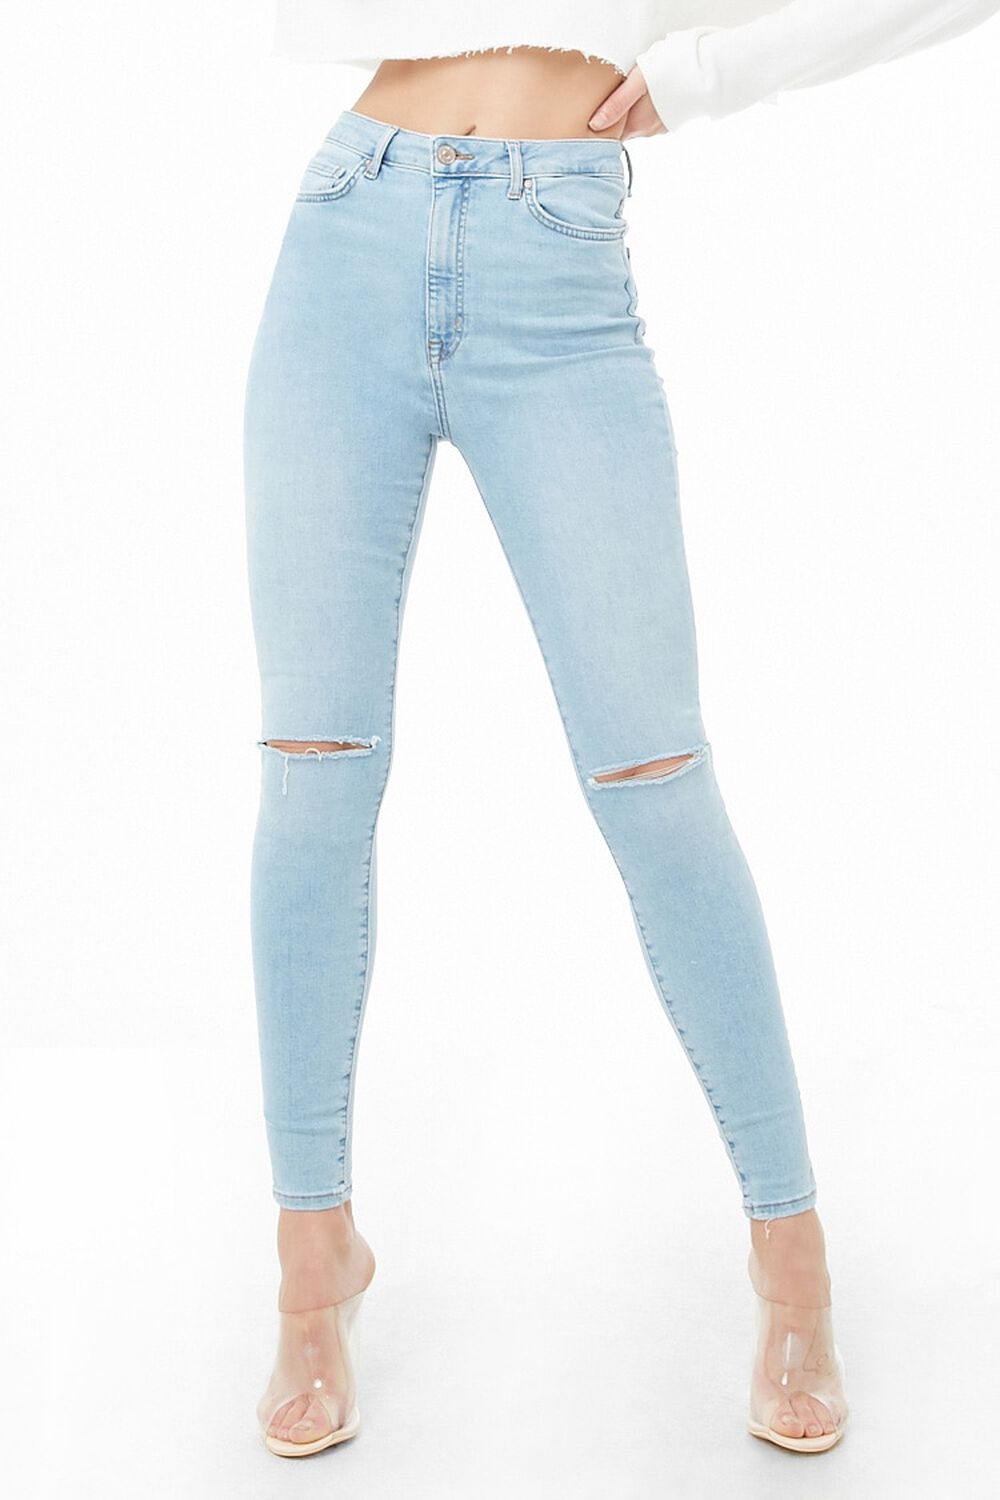 Sculpted High-Rise Skinny Jeans, image 1